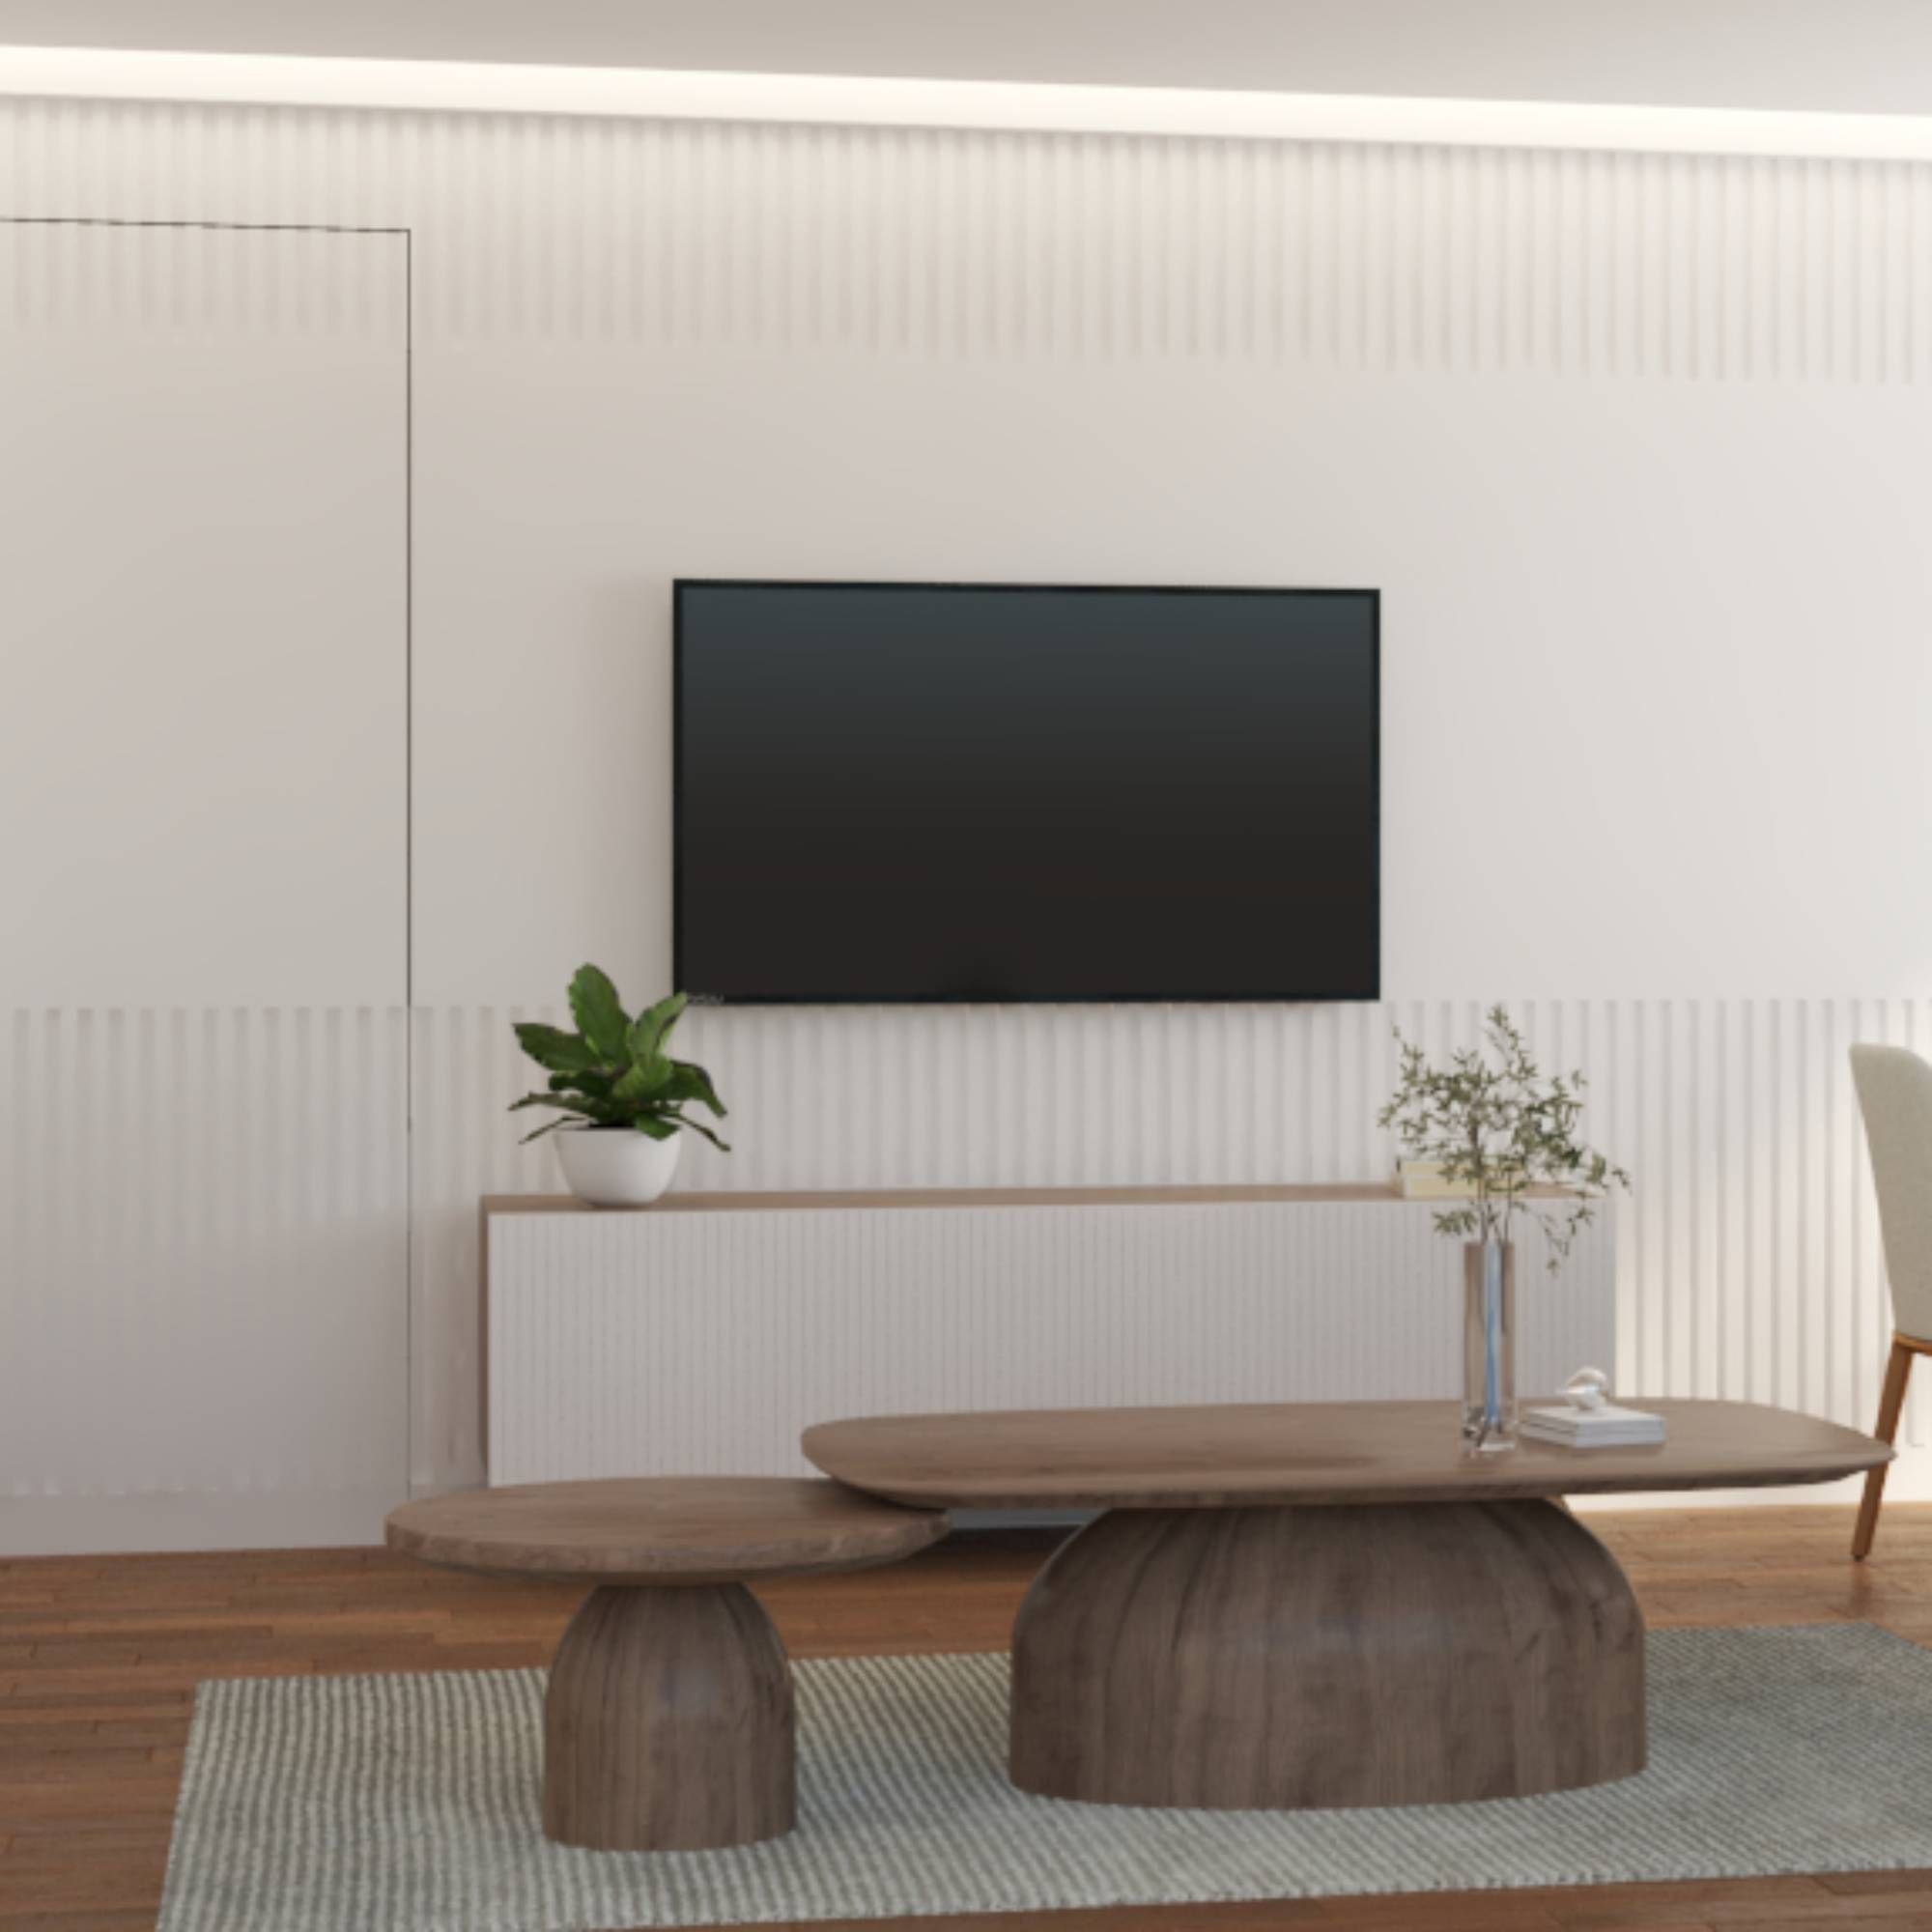 Floor-Mounted Modern TV Unit With White Fluted Panelling For The Back Wall